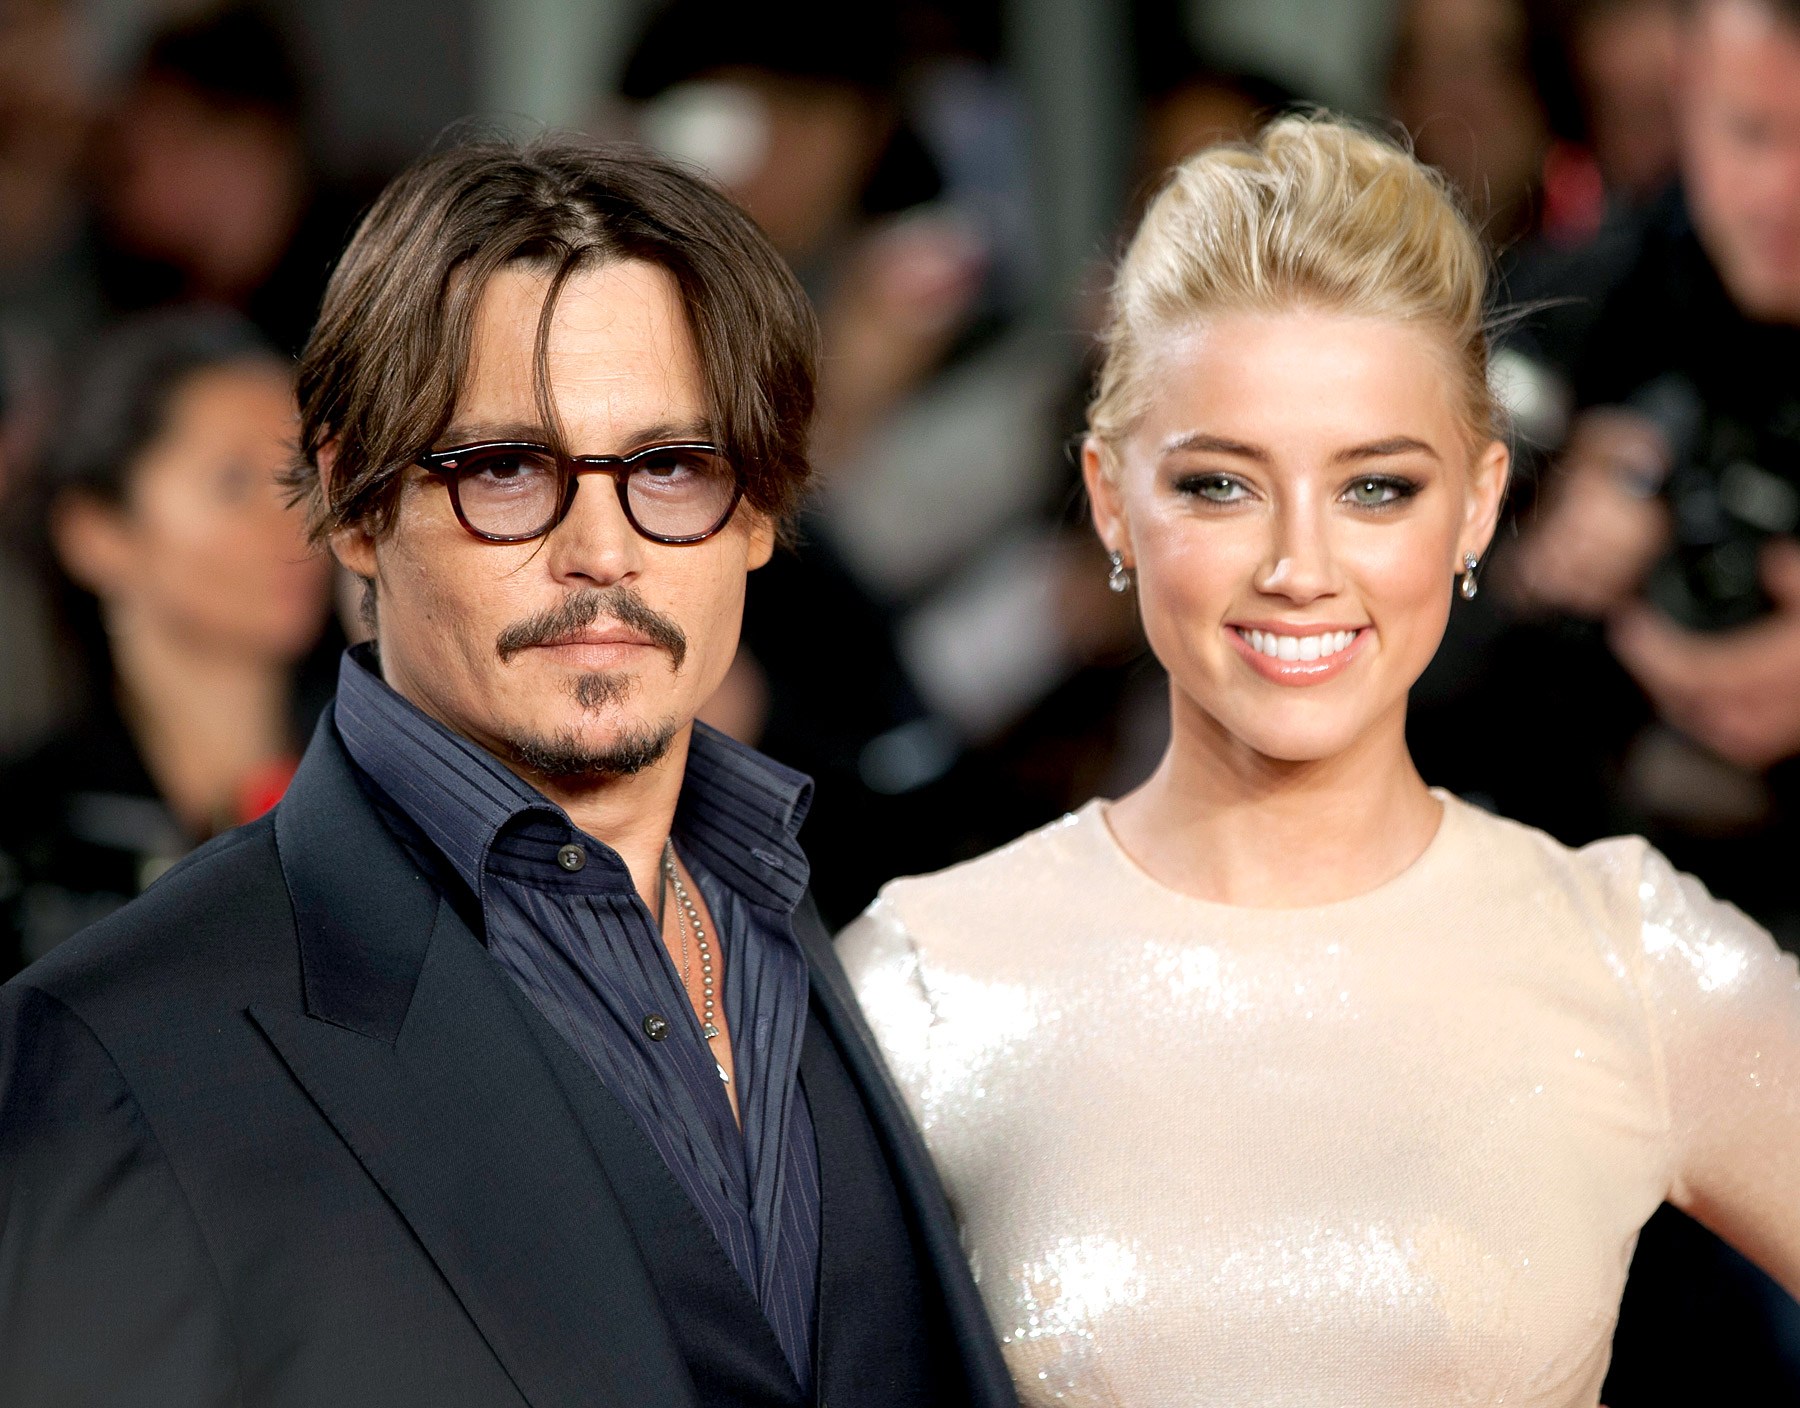 The scandal of abusing his ex-wife still hasn't sunk Johnny Depp's career.